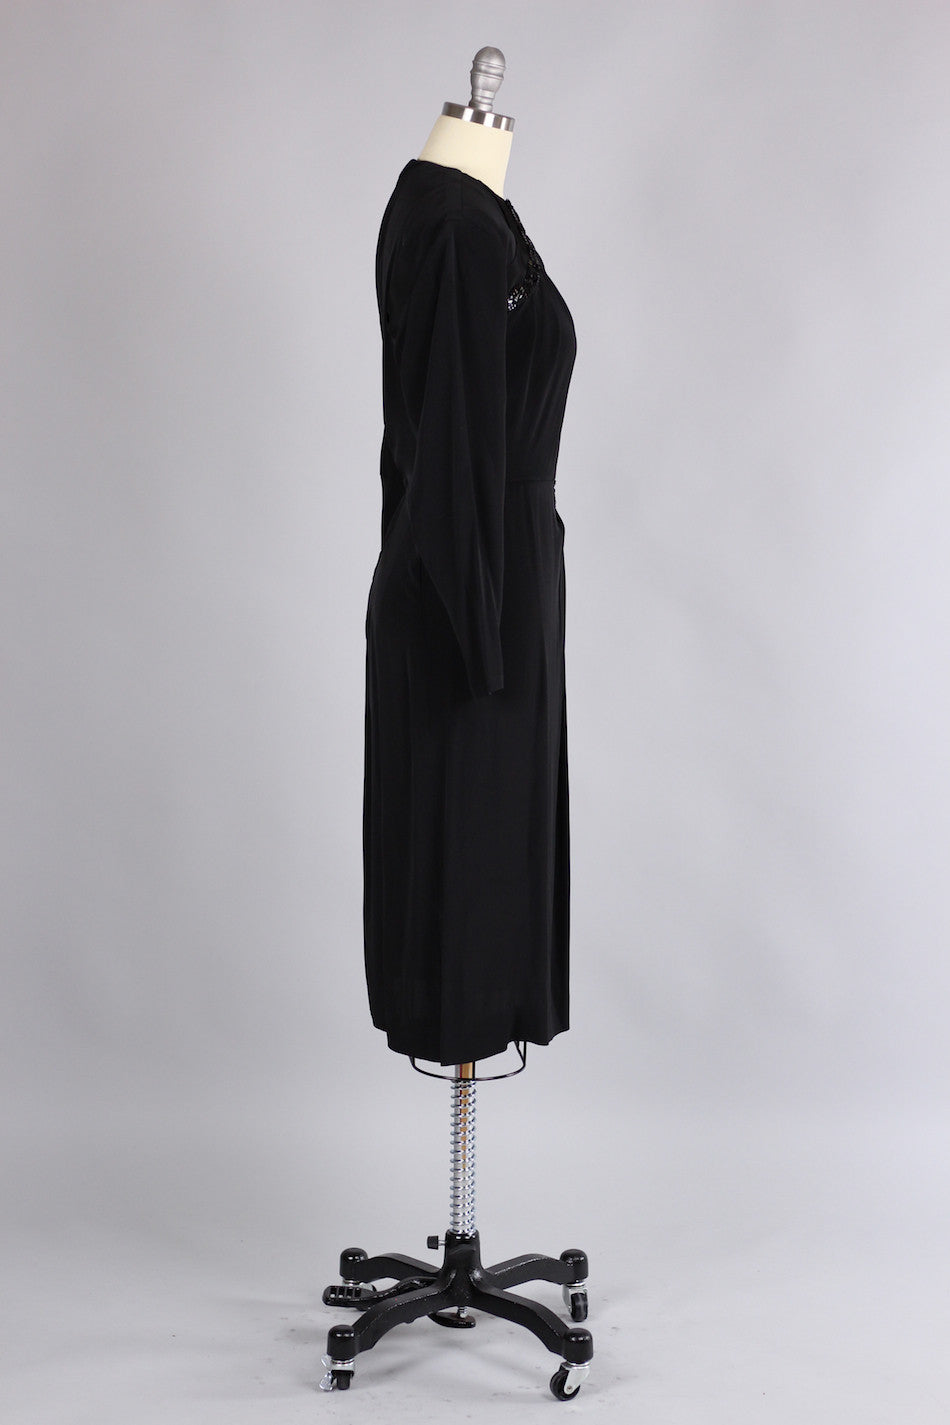 Early 1940s Black Rayon & Sequin Cocktail Dress